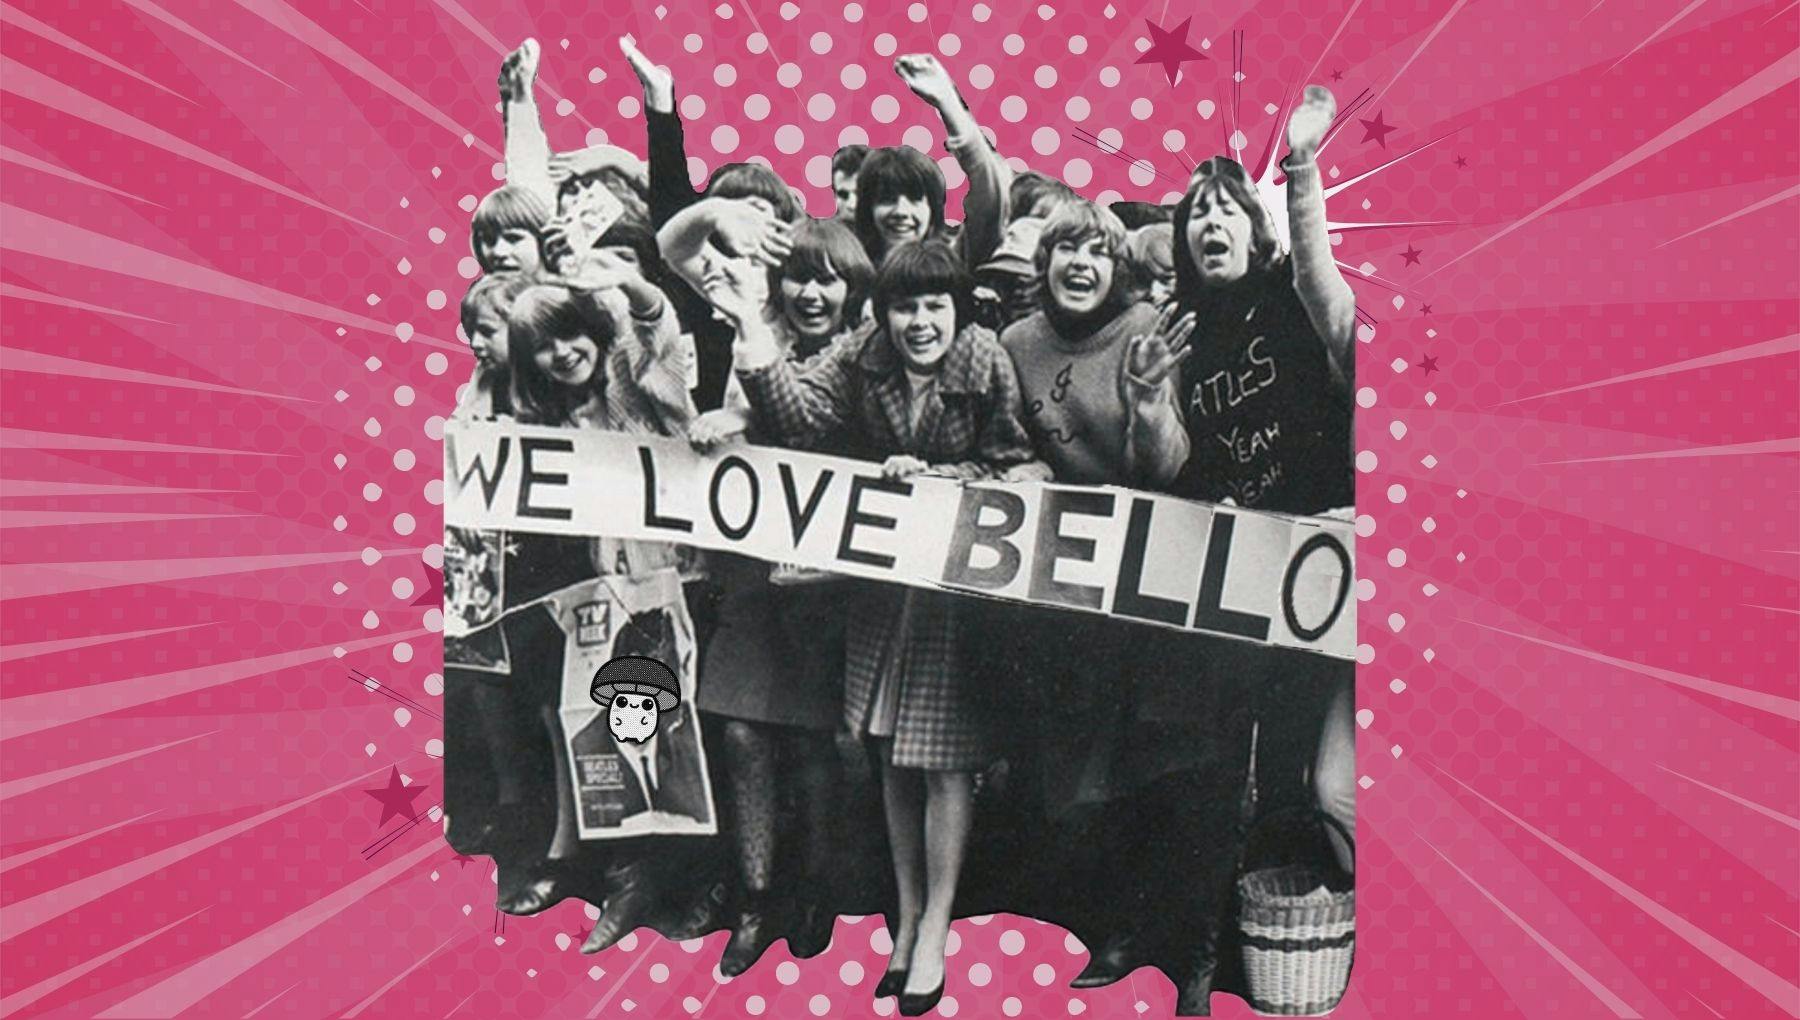 A group of powerful women in the 60s screaming their love for Bello.